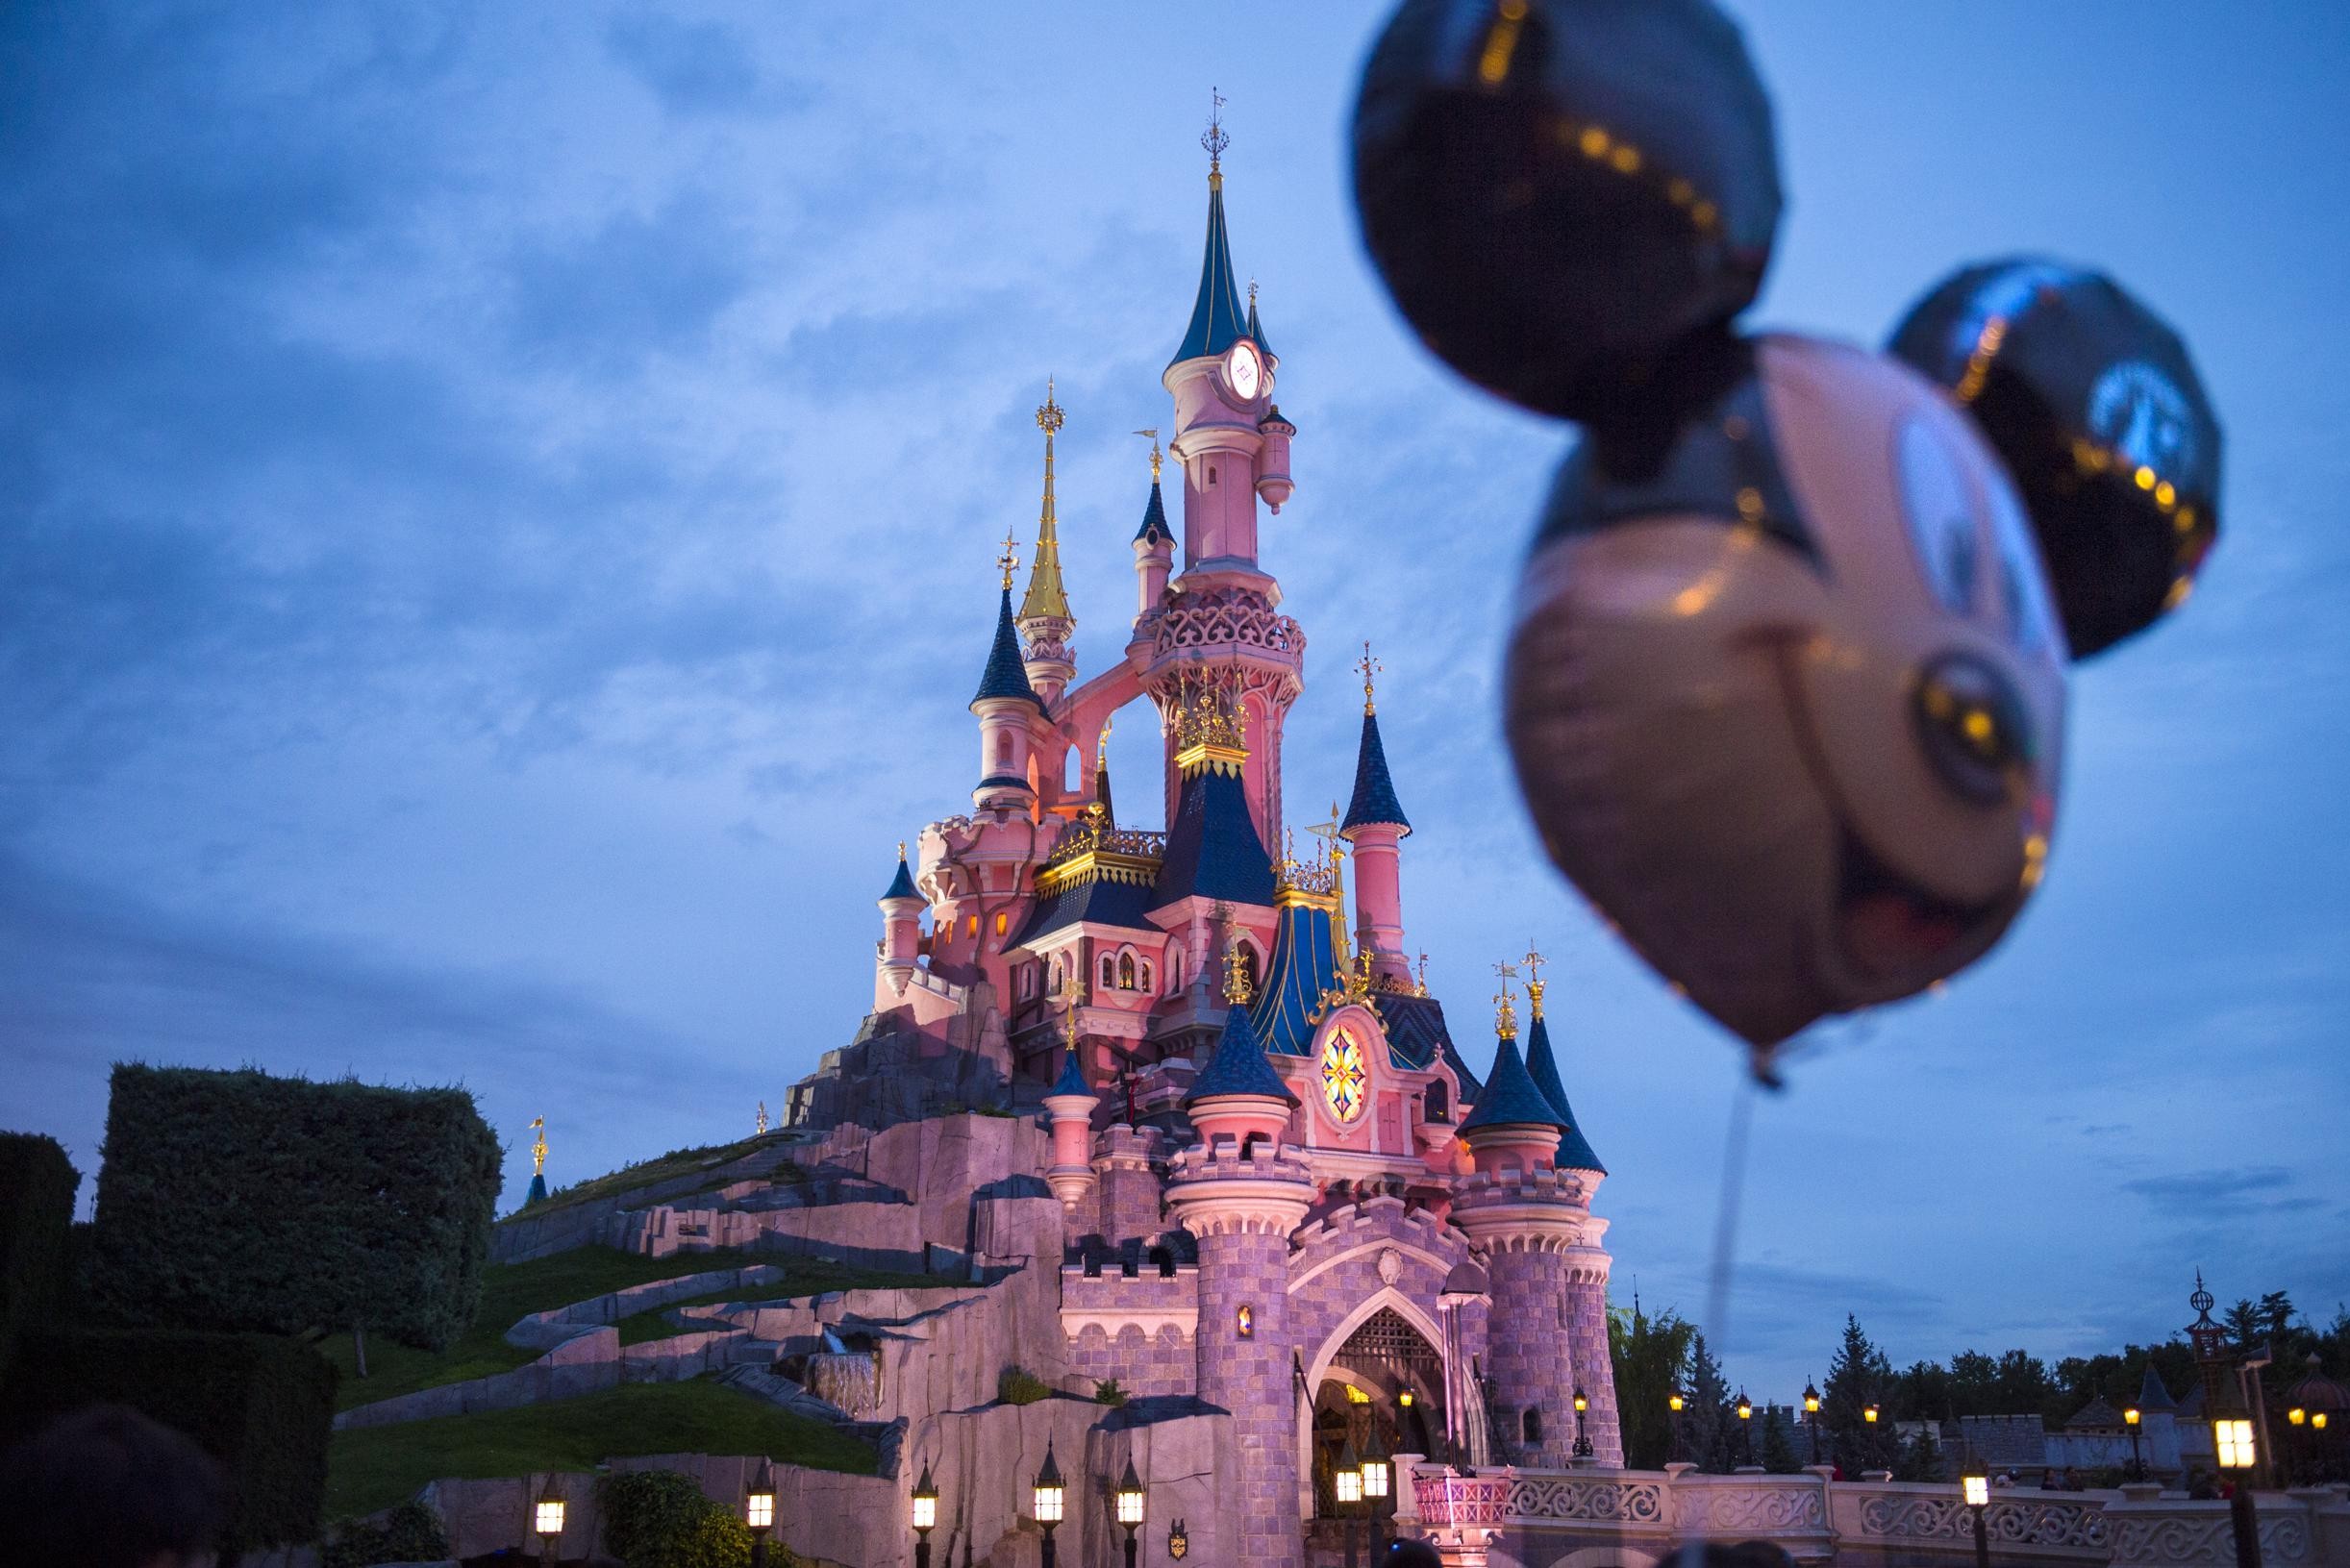 30 years of Disneyland Paris: what was supposed to be a fairytale turned into a financial rollercoaster